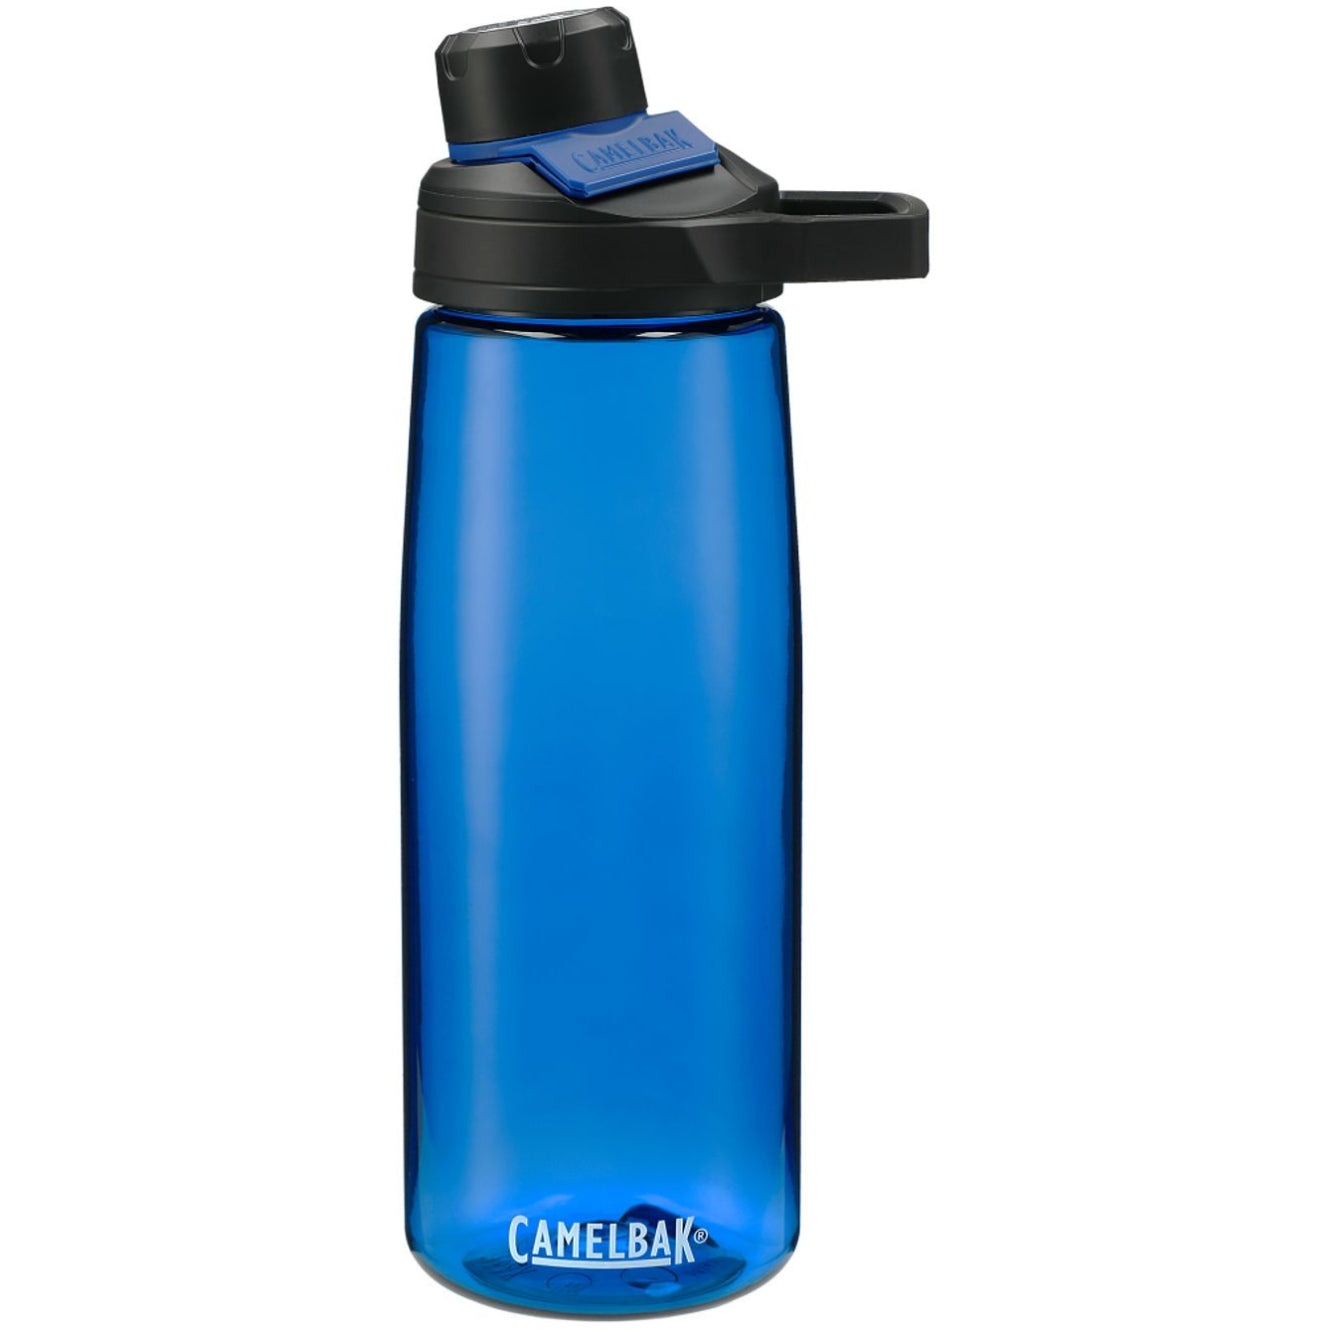 Customizable recycled plastic Camelbak Chute water bottle in blue